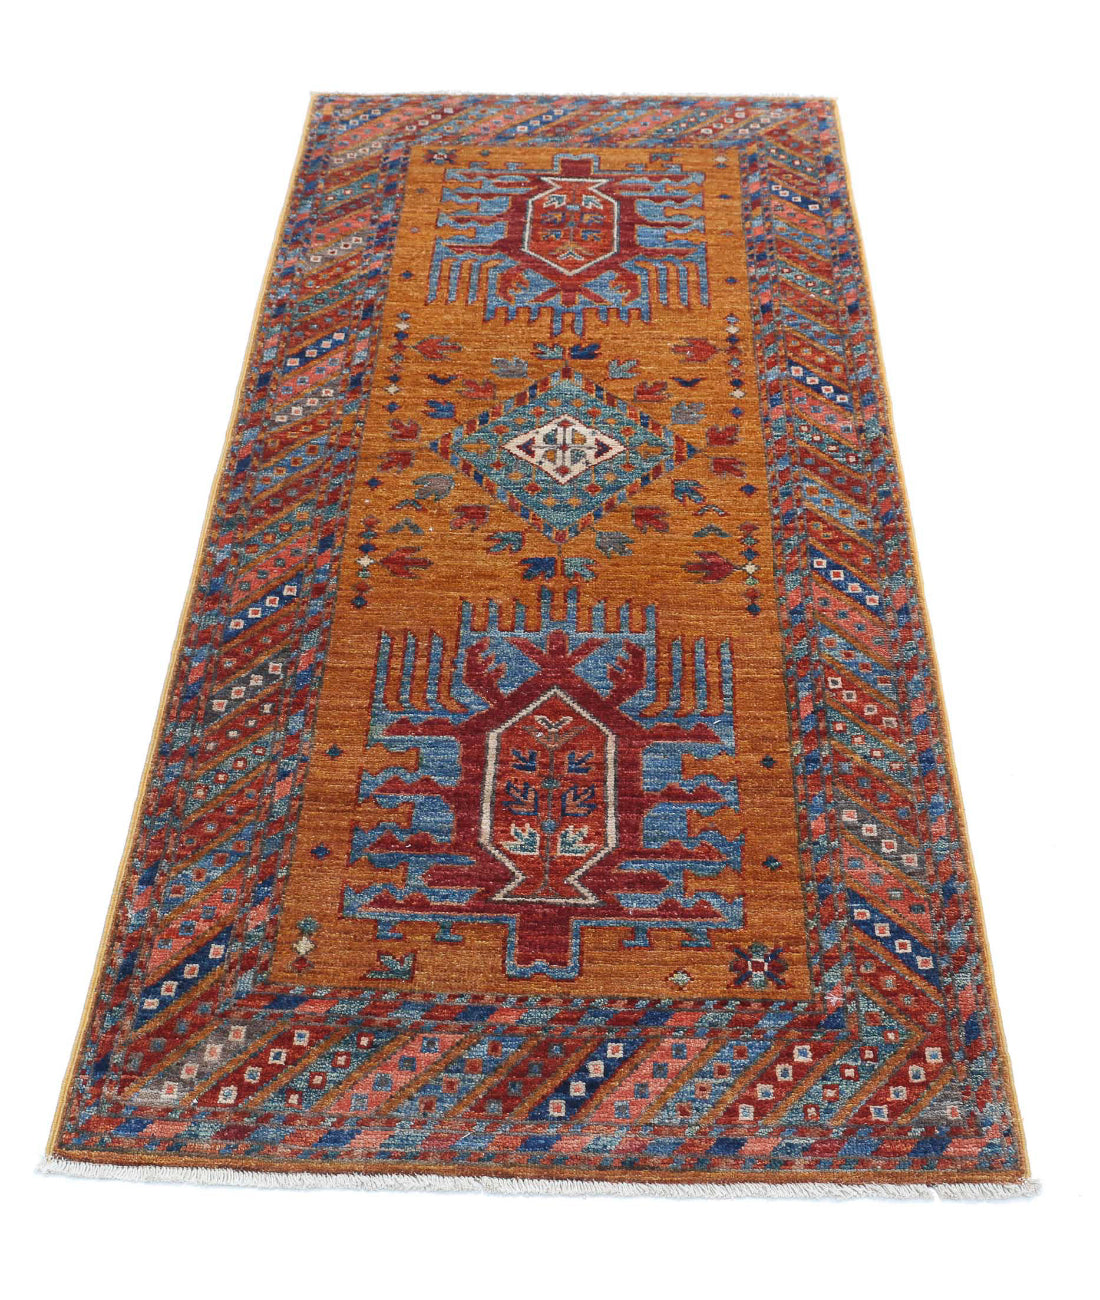 Hand Knotted Nomadic Caucasian Humna Wool Rug - 2'8'' x 5'9'' 2'8'' x 5'9'' (80 X 173) / Gold / Multi